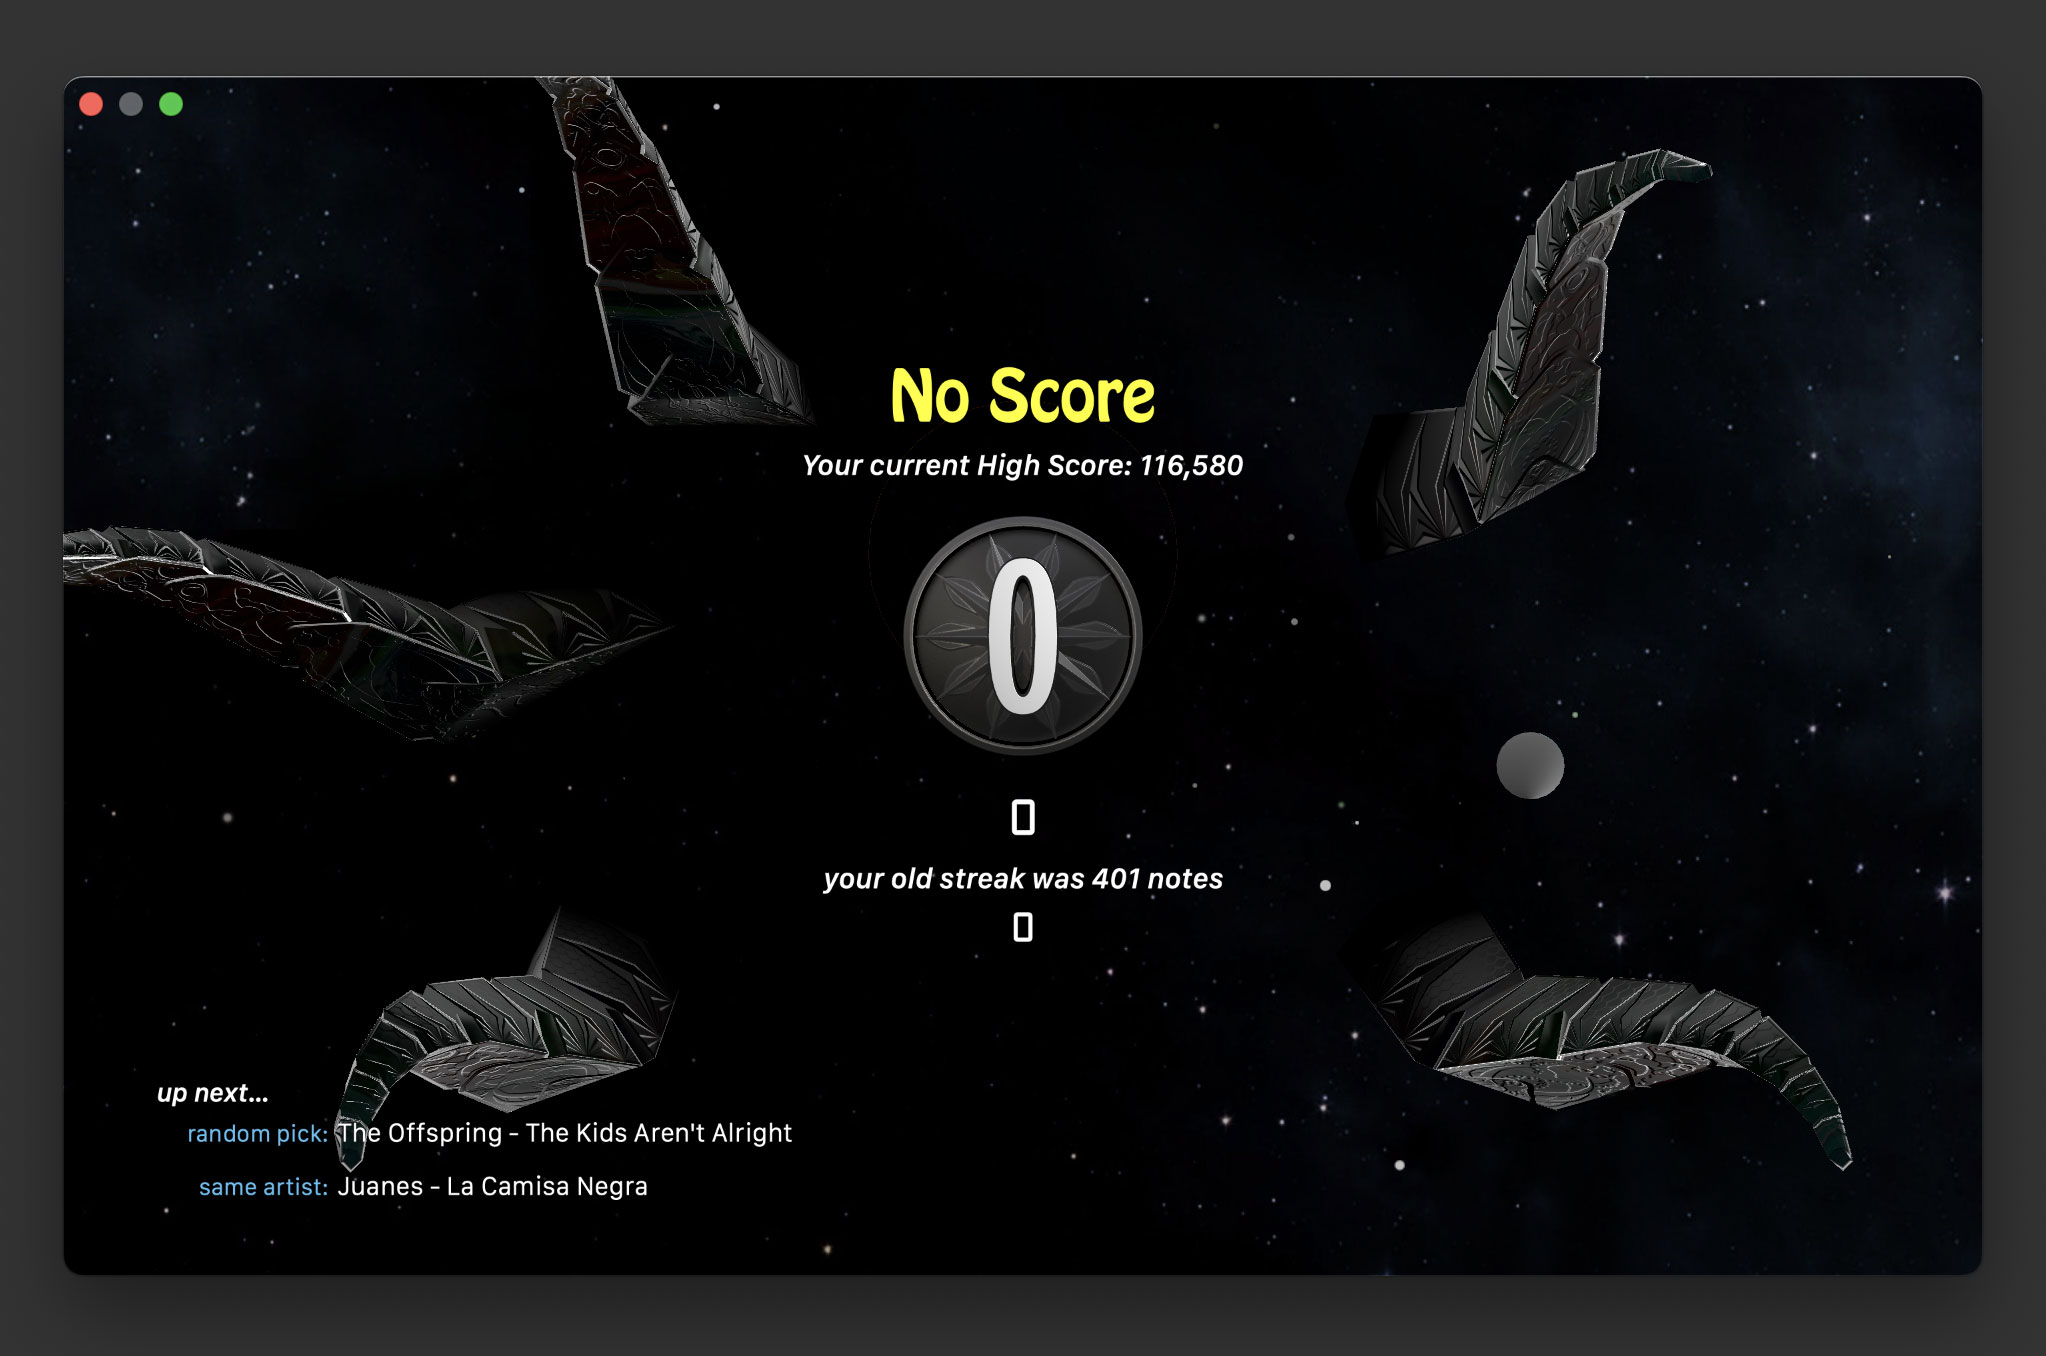 noice score dispplay screen - featuring new star system and random song layout